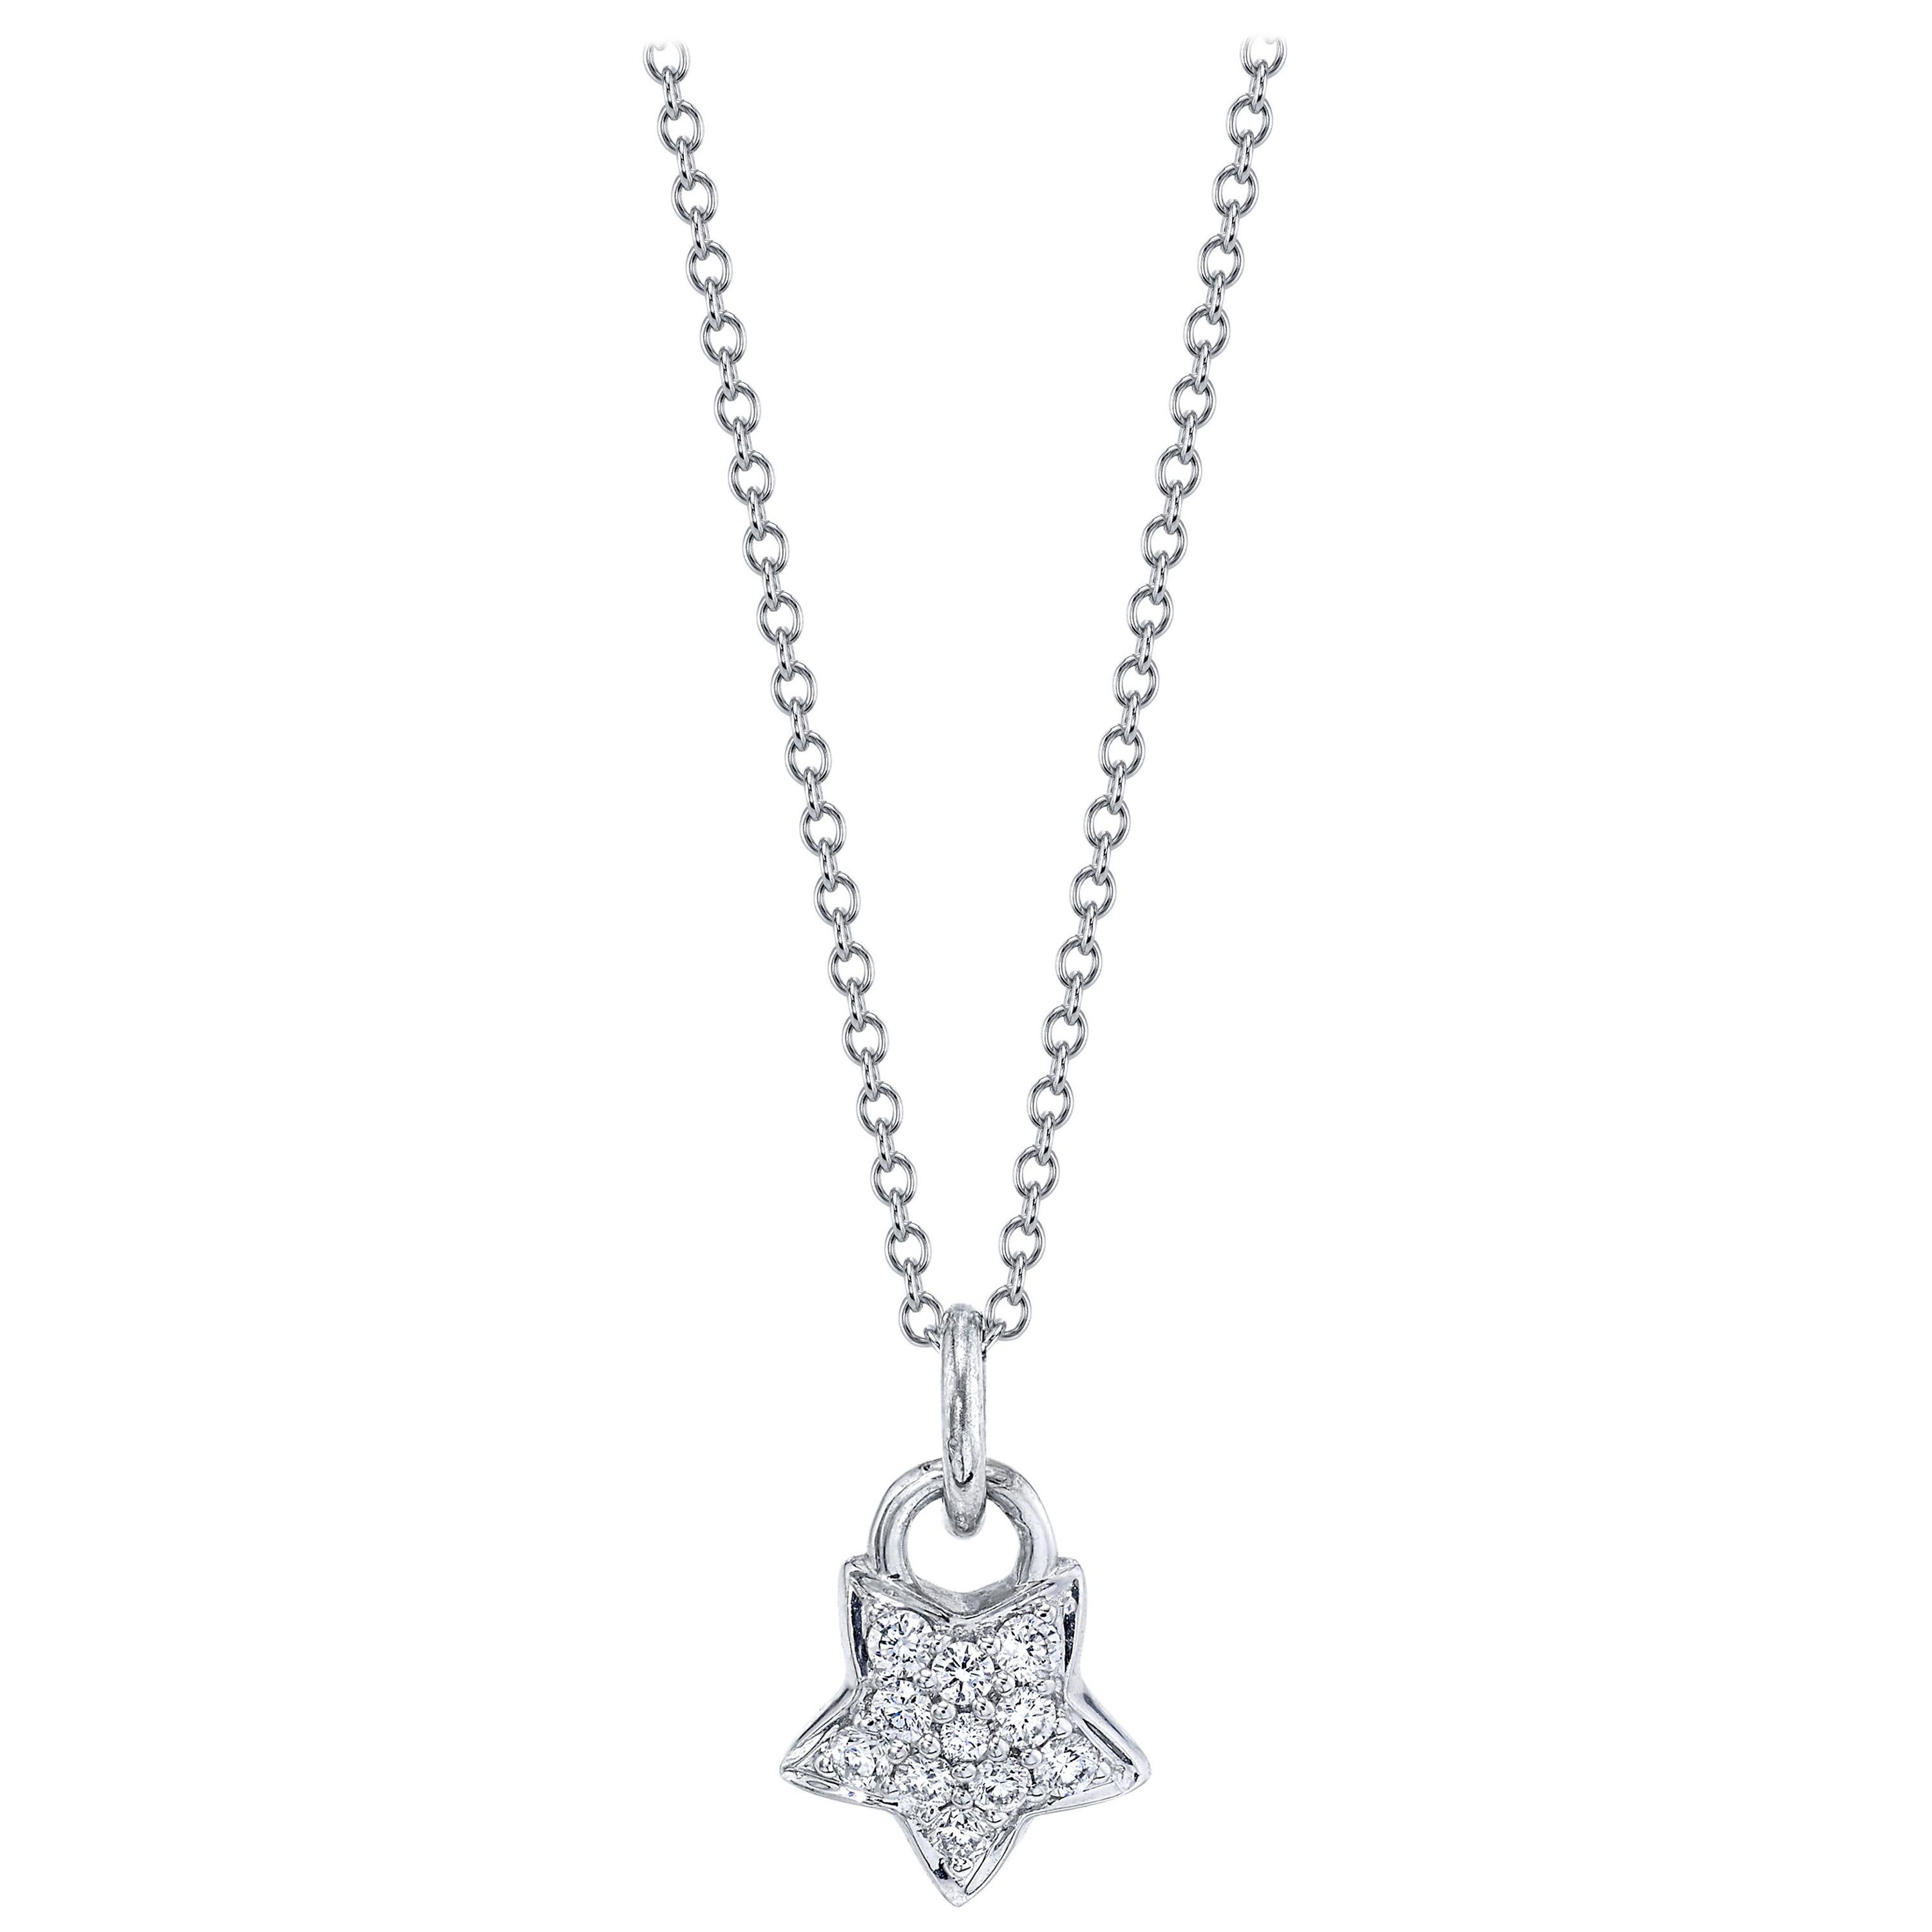 Diamond and White Gold Dancing Star Pendant Necklace with Chain